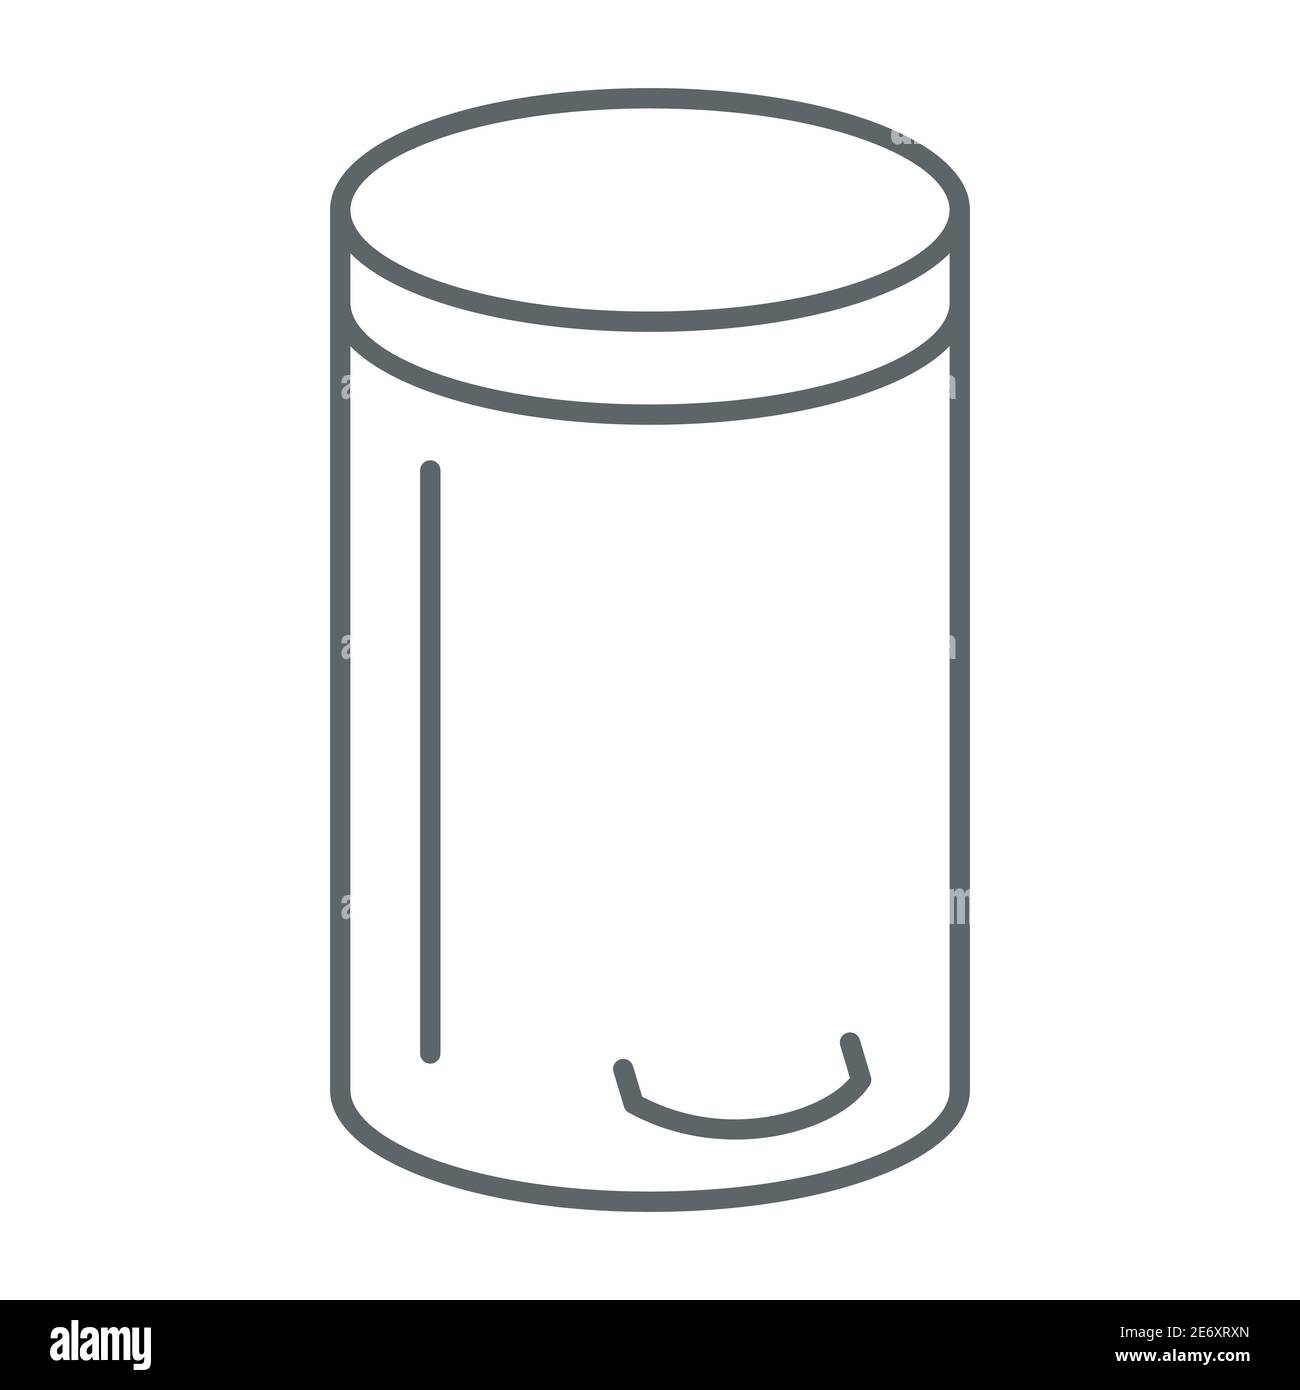 Bin thin line icon, Kitchen appliances concept, Trash can sign on white background, Dustbin icon in outline style for mobile concept and web design Stock Vector